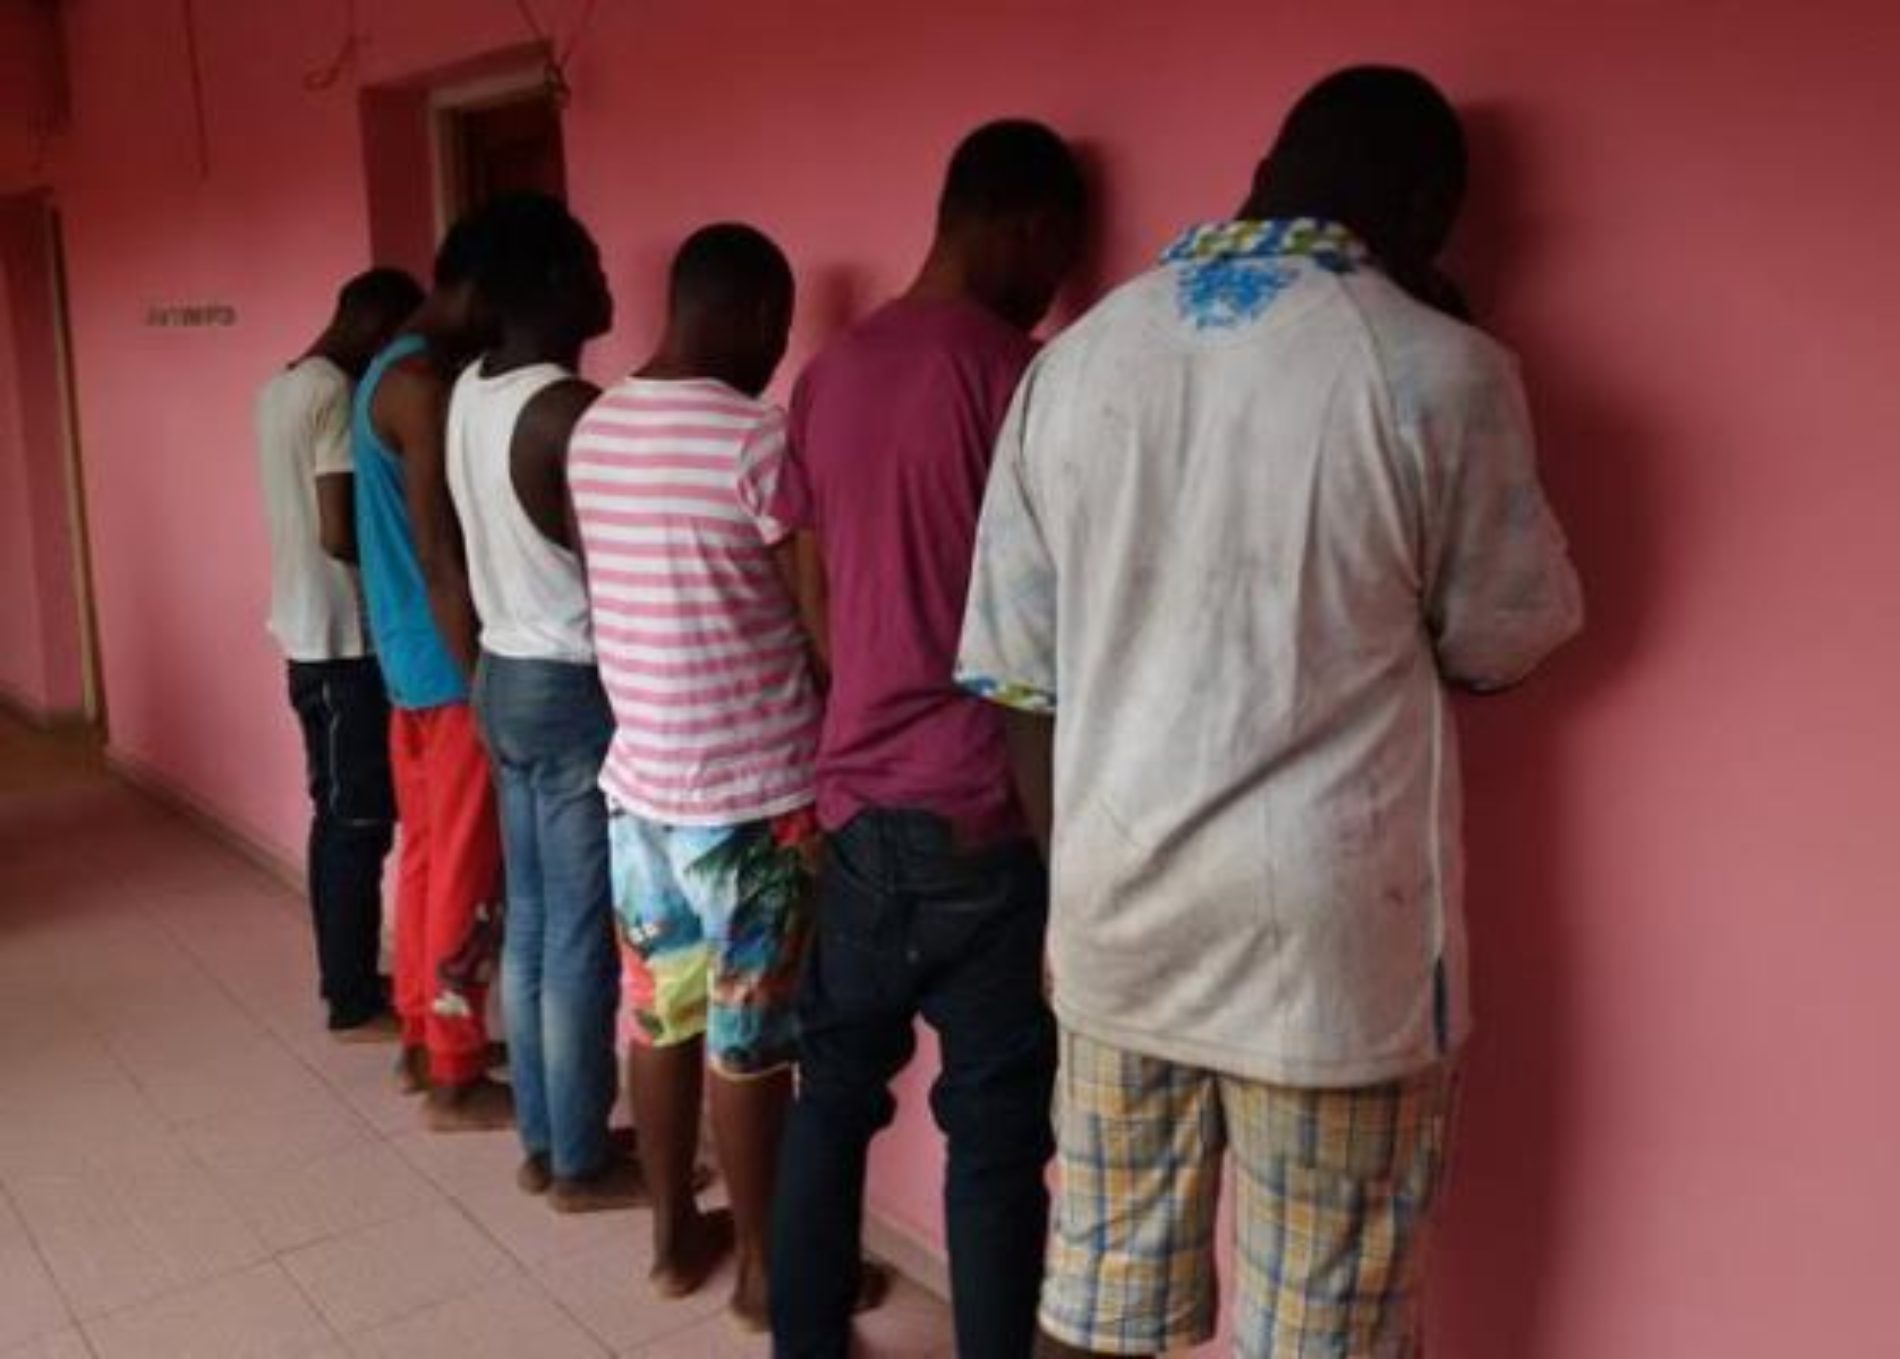 Six Gay Men Allegedly Arrested in Edo State